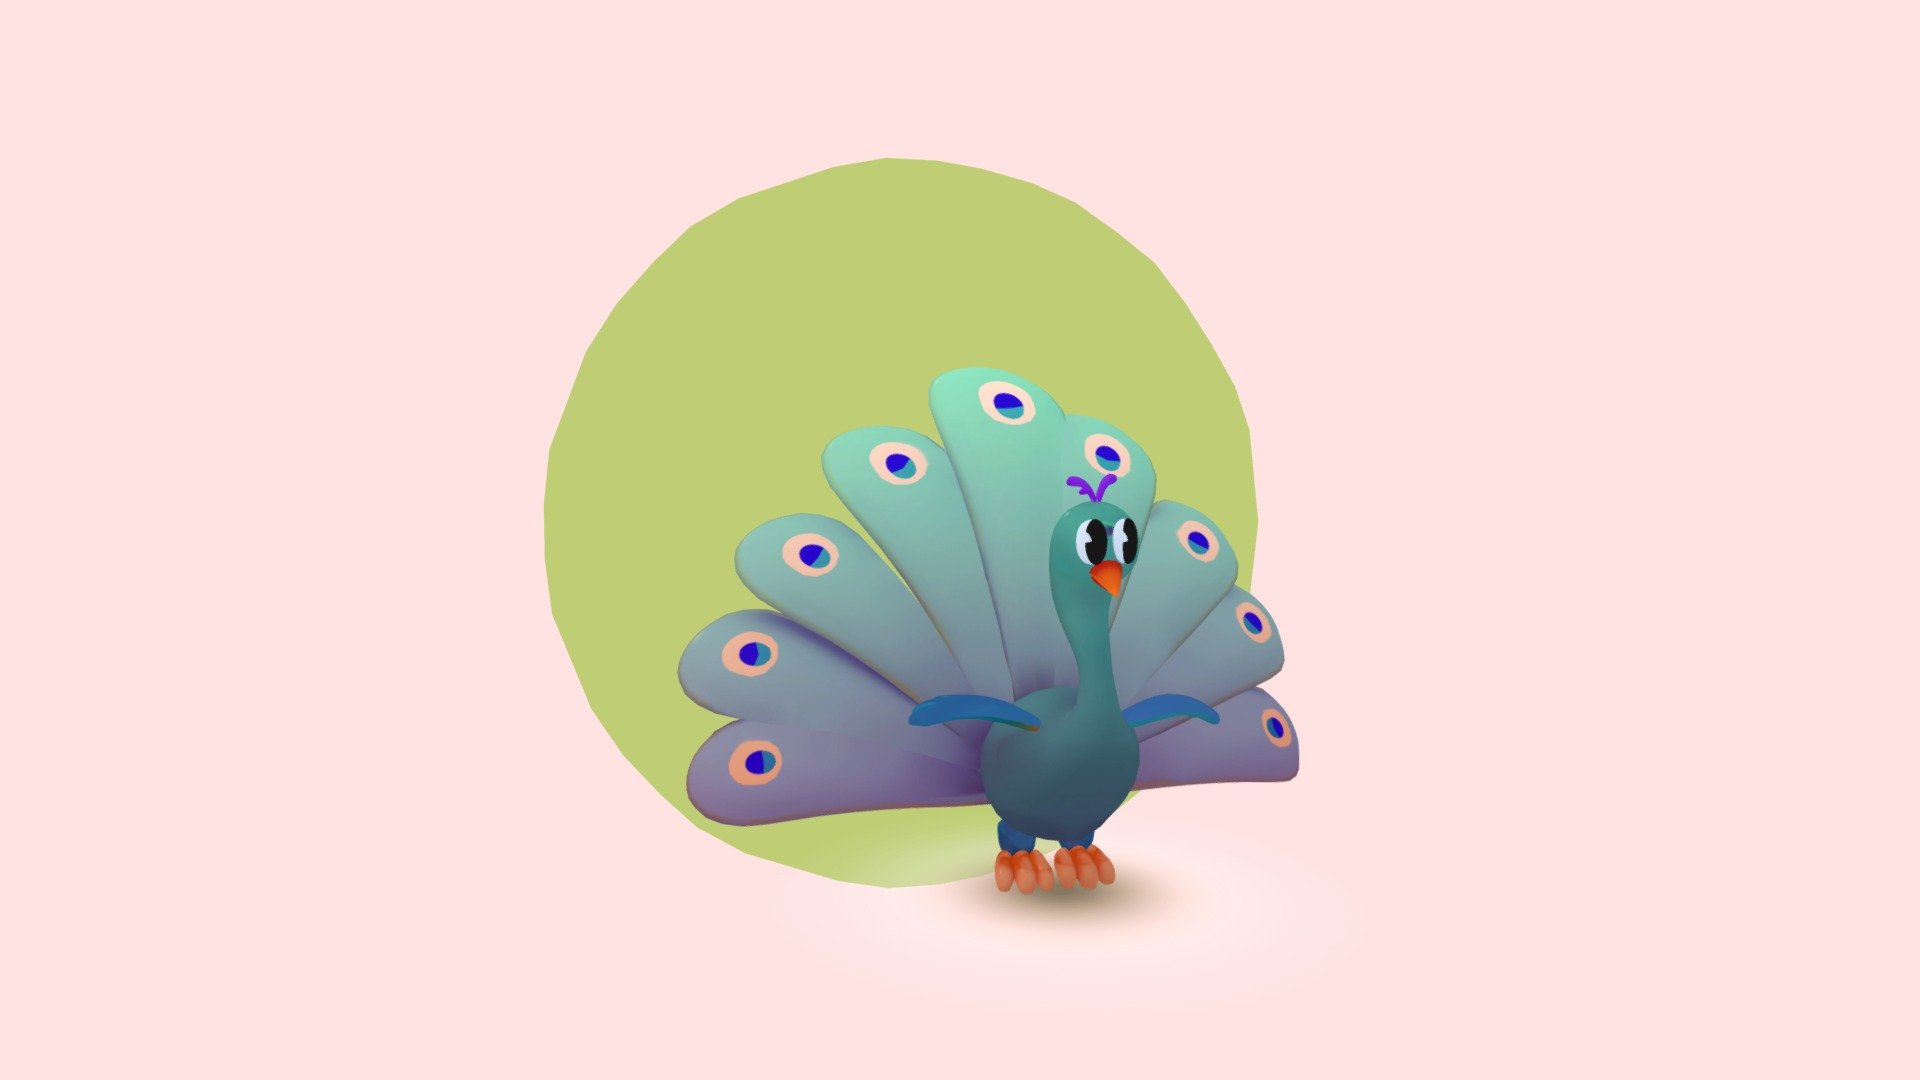 Turkey is a character from https://skfb.ly/oLxUt




You can buy the characters and use them in your projects!



Mushrooman

https://skfb.ly/oLyQ9

Cute Worm

https://skfb.ly/oLyQG

Unicorn

https://skfb.ly/oLyVz

Happy Flower

https://skfb.ly/oLzps

Time to play

https://skfb.ly/oLzB6
 - Cute Peacock - Buy Royalty Free 3D model by msanjurj 3d model